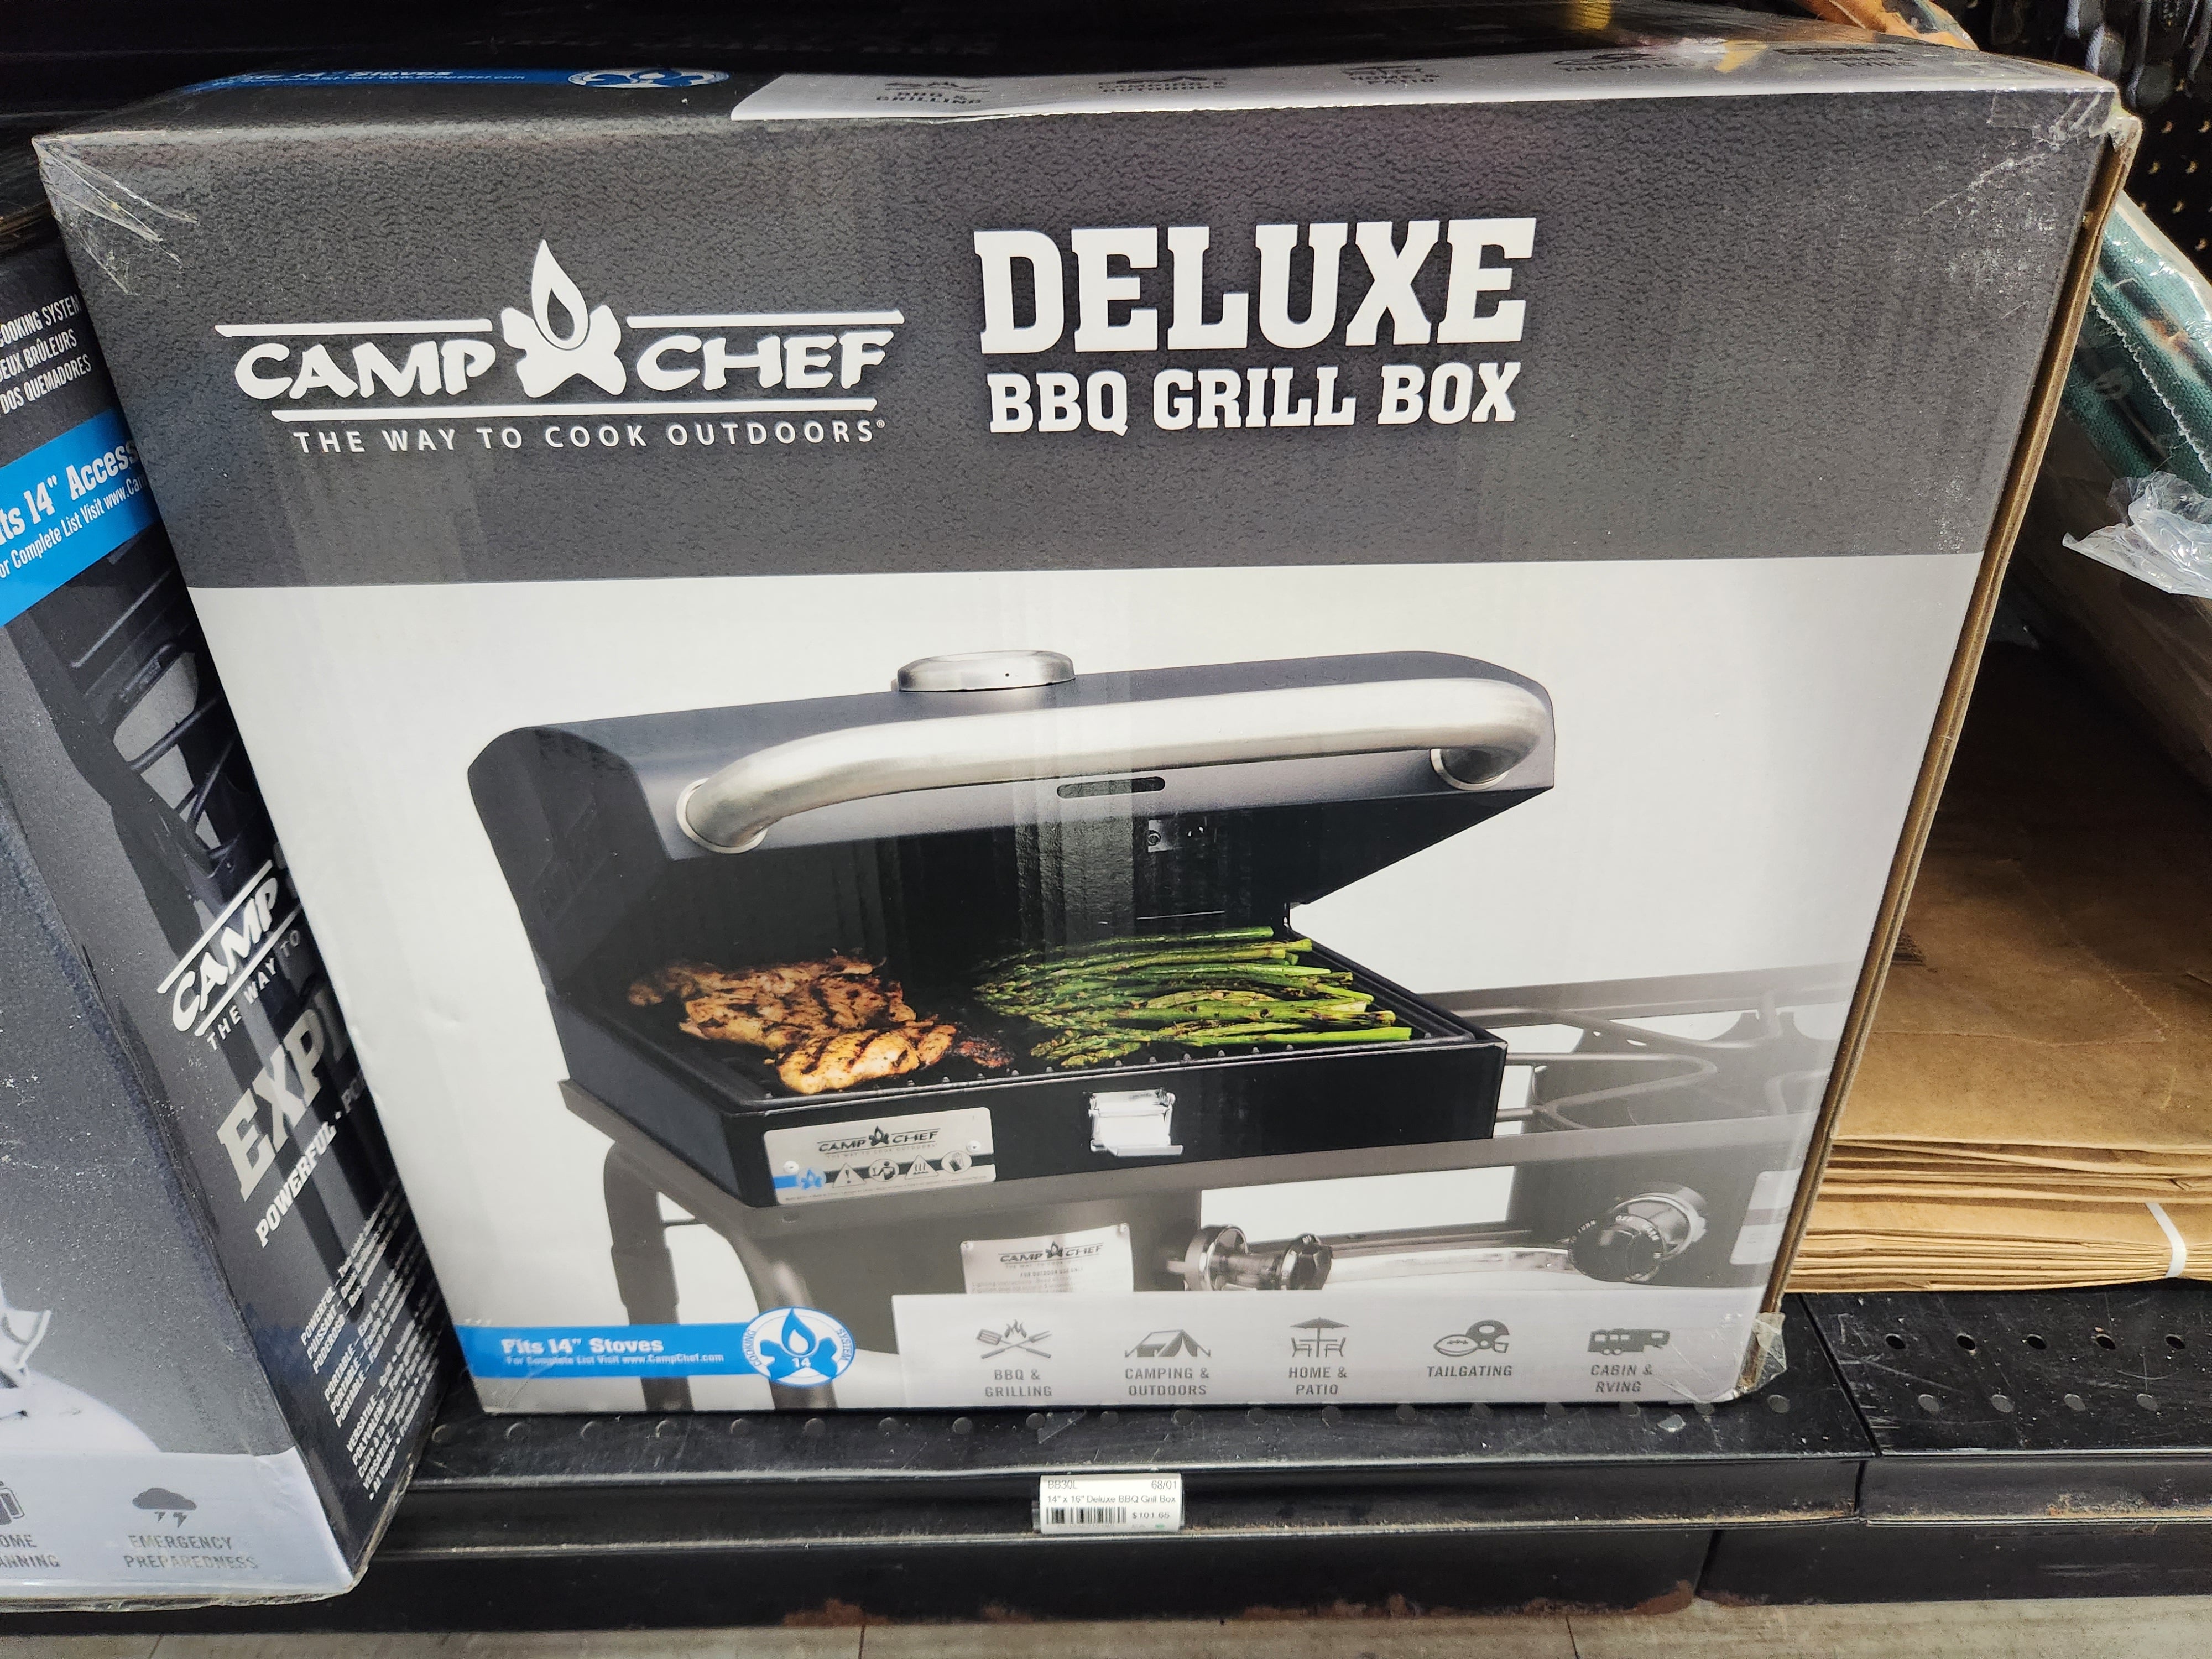 Camp Chef Deluxe BBQ Grill Box (fits 14" Stoves)